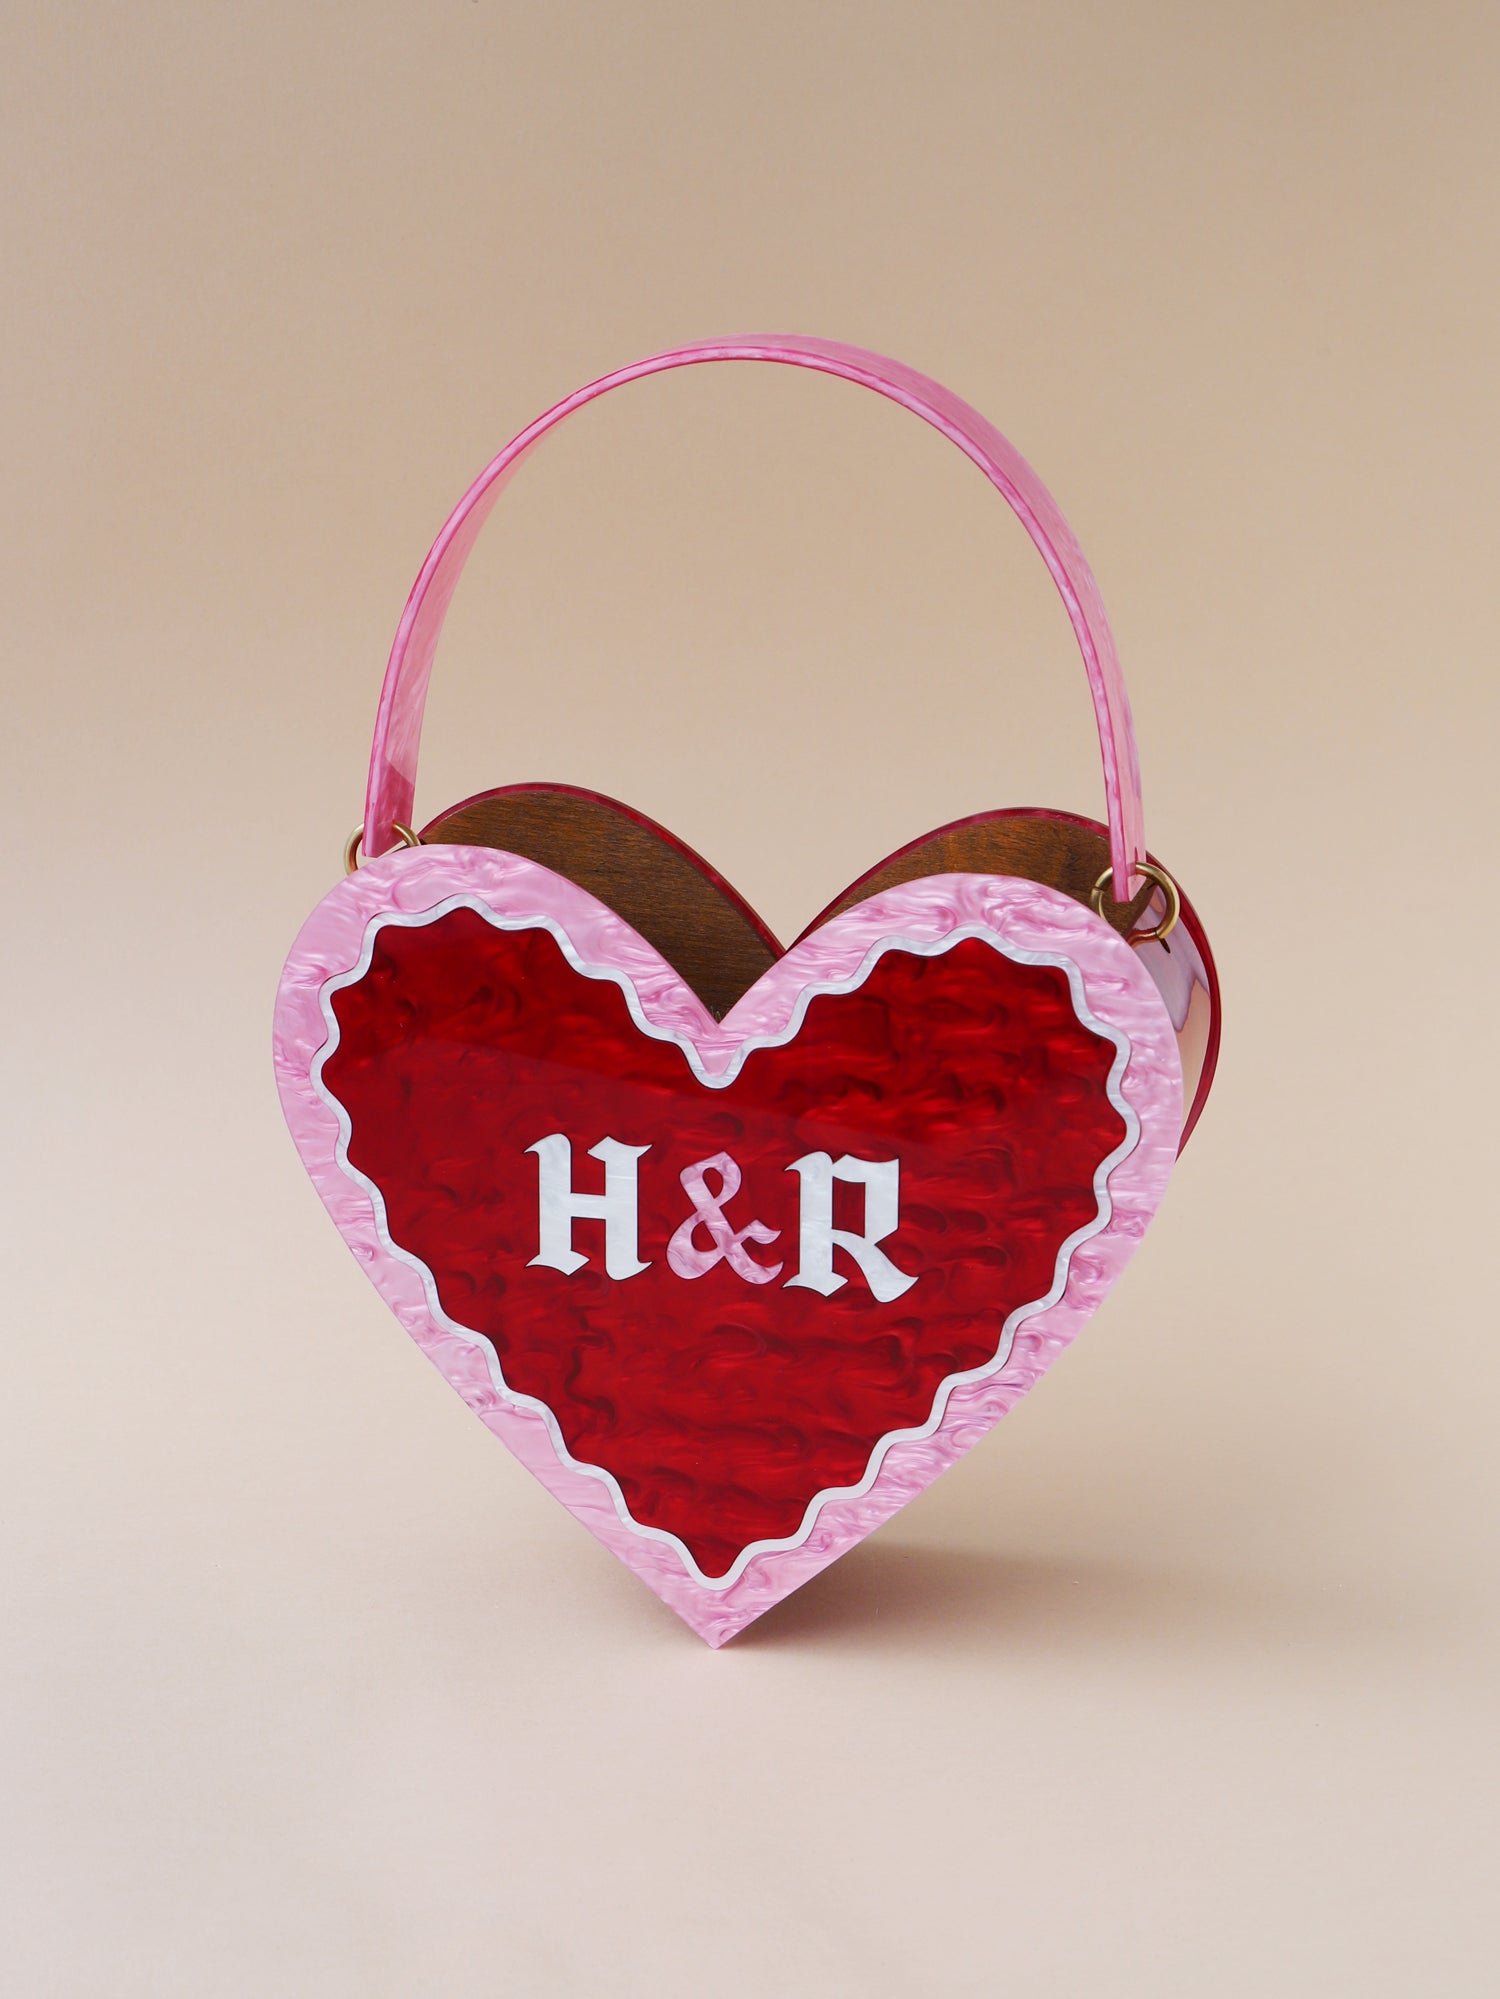 Heart Bag in Pink/Red